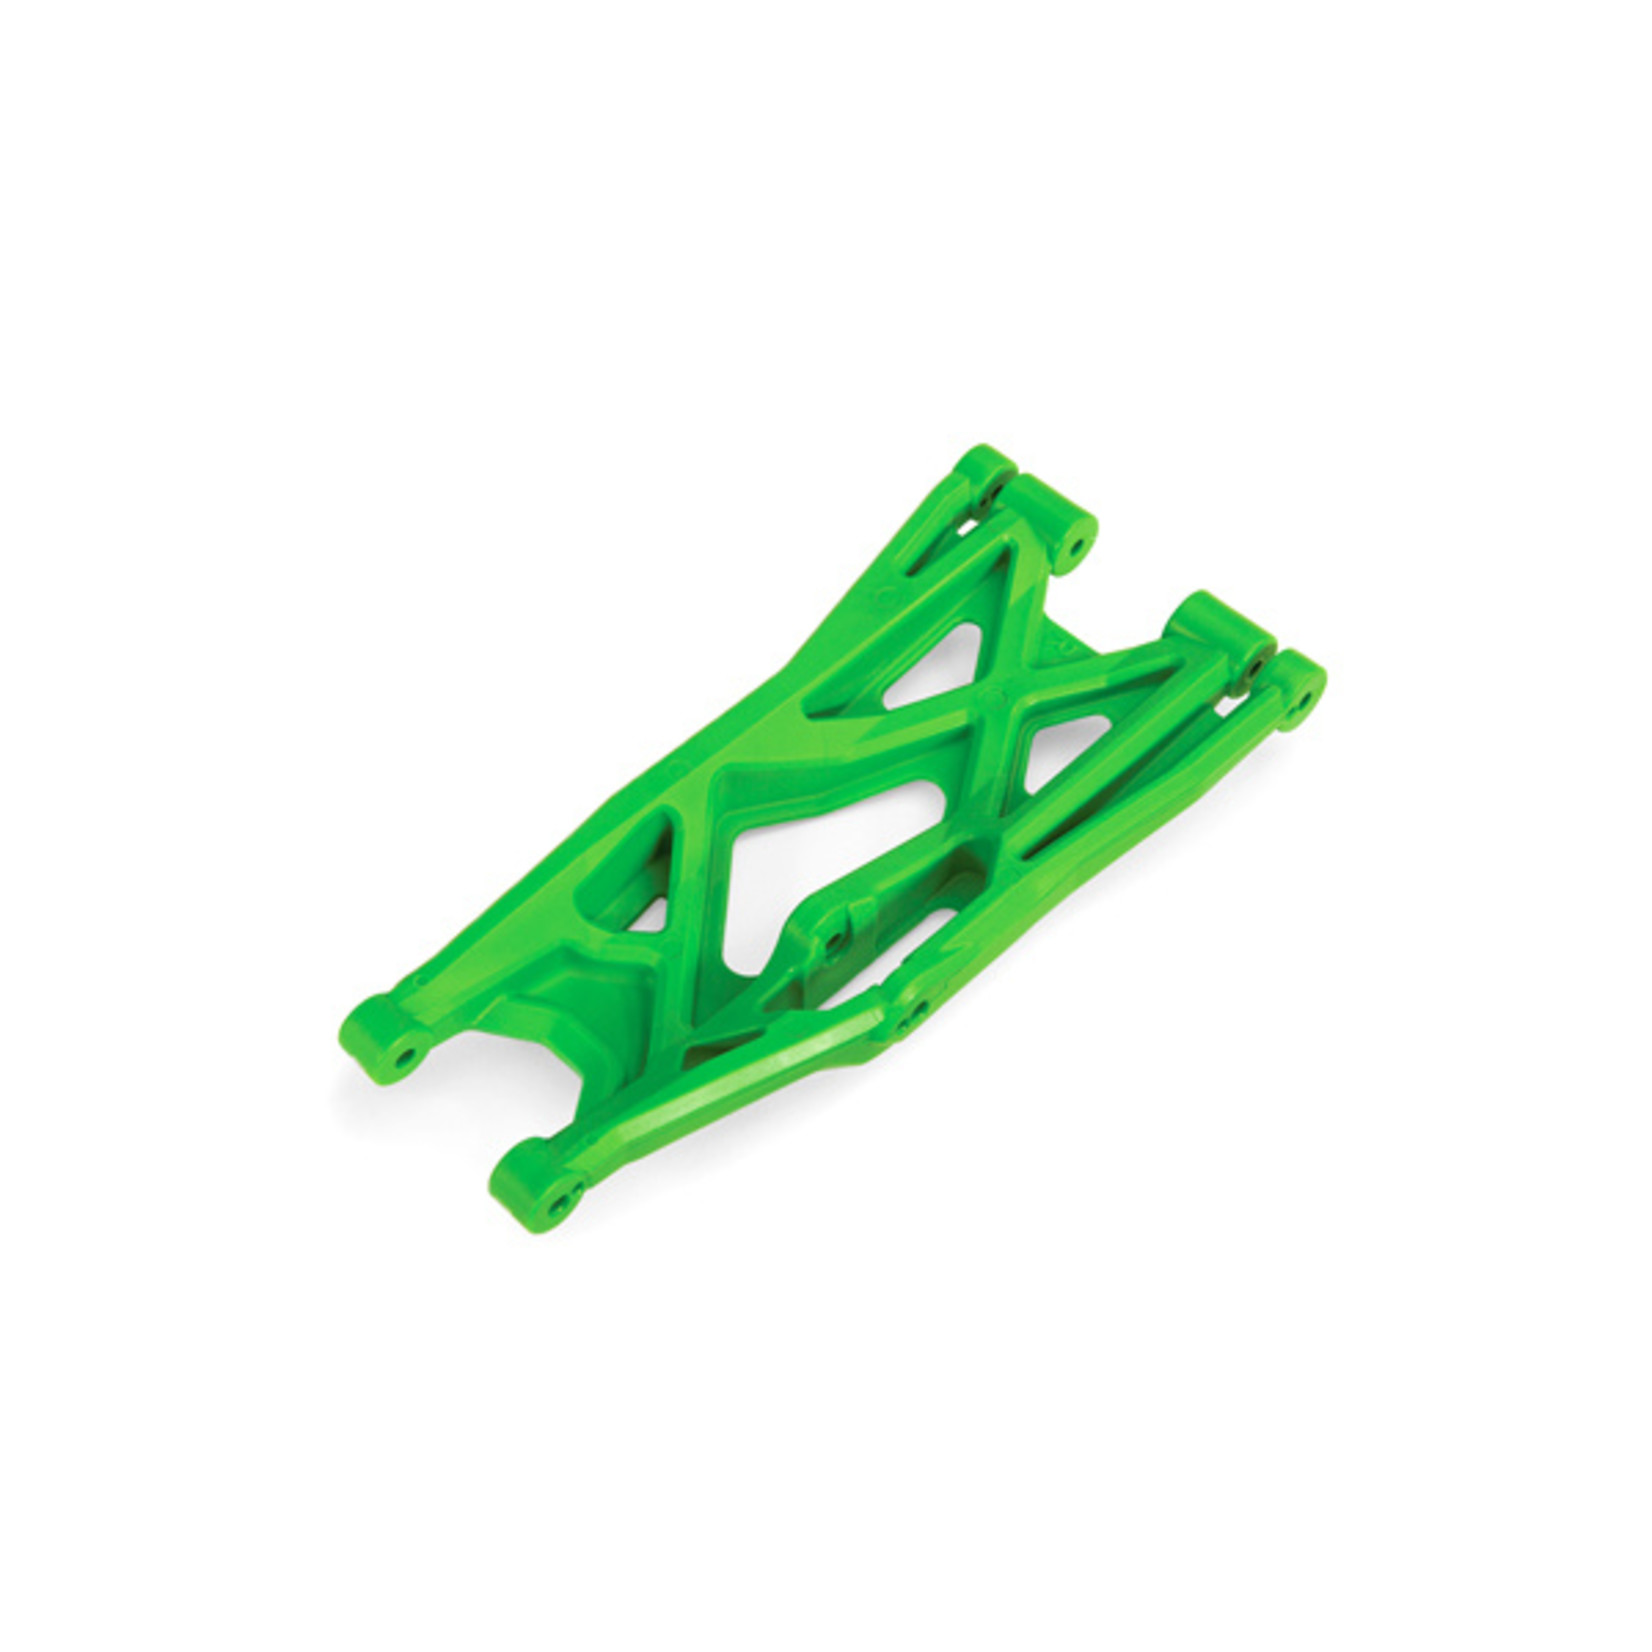 Traxxas 7830G - Suspension arm, green, lower (right, front